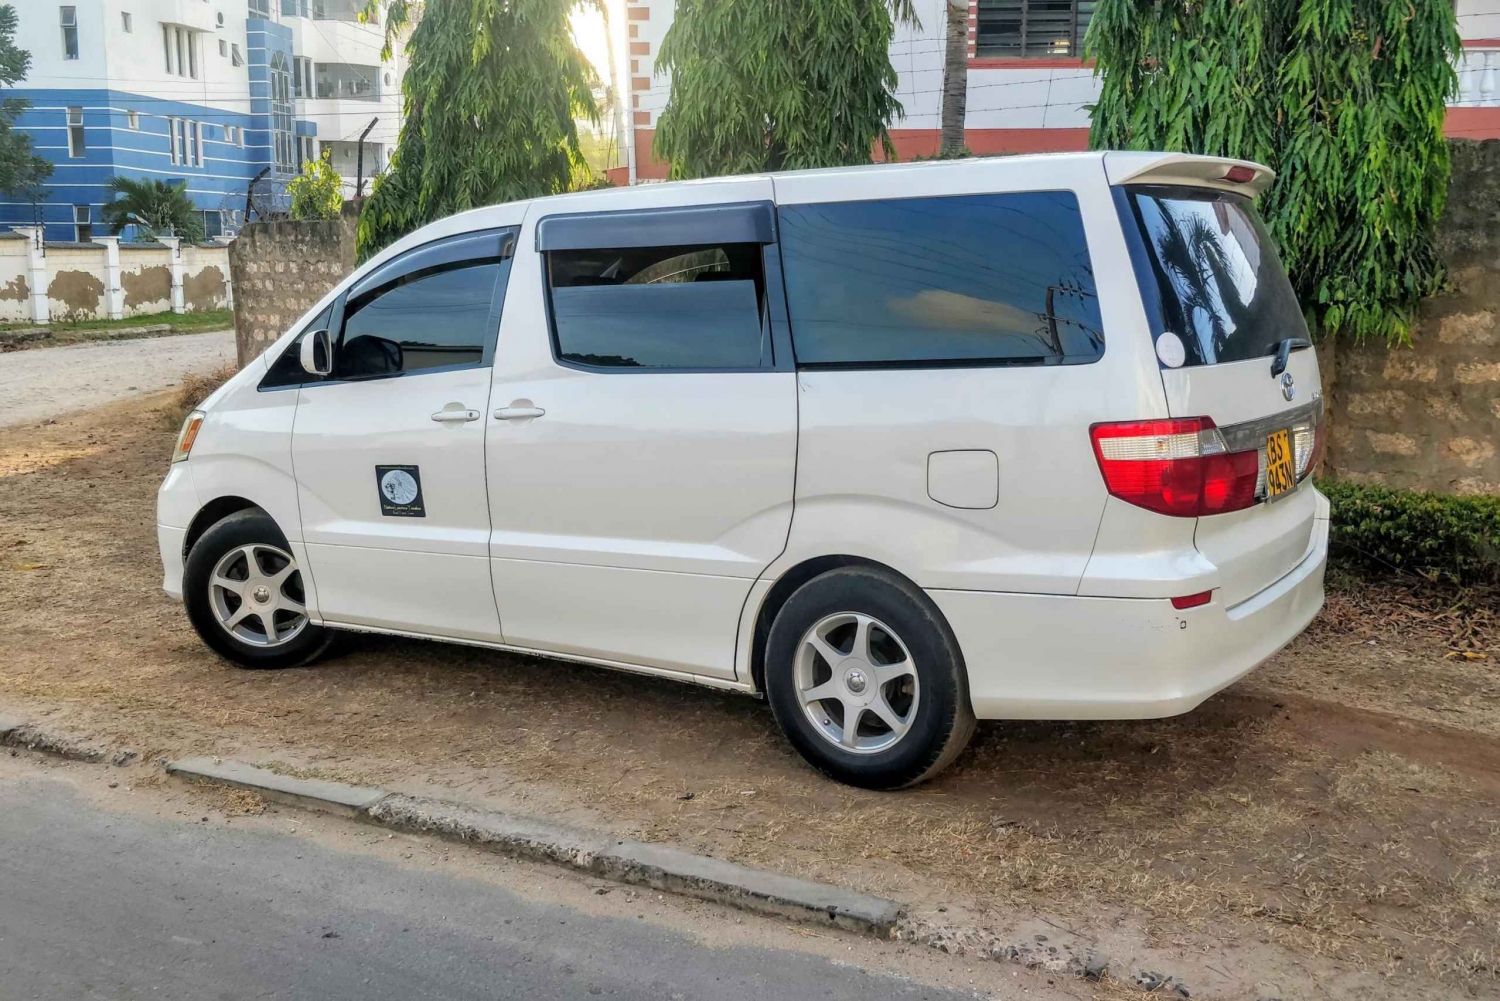 Mombasa Airport Private Transfer to Diani Beach